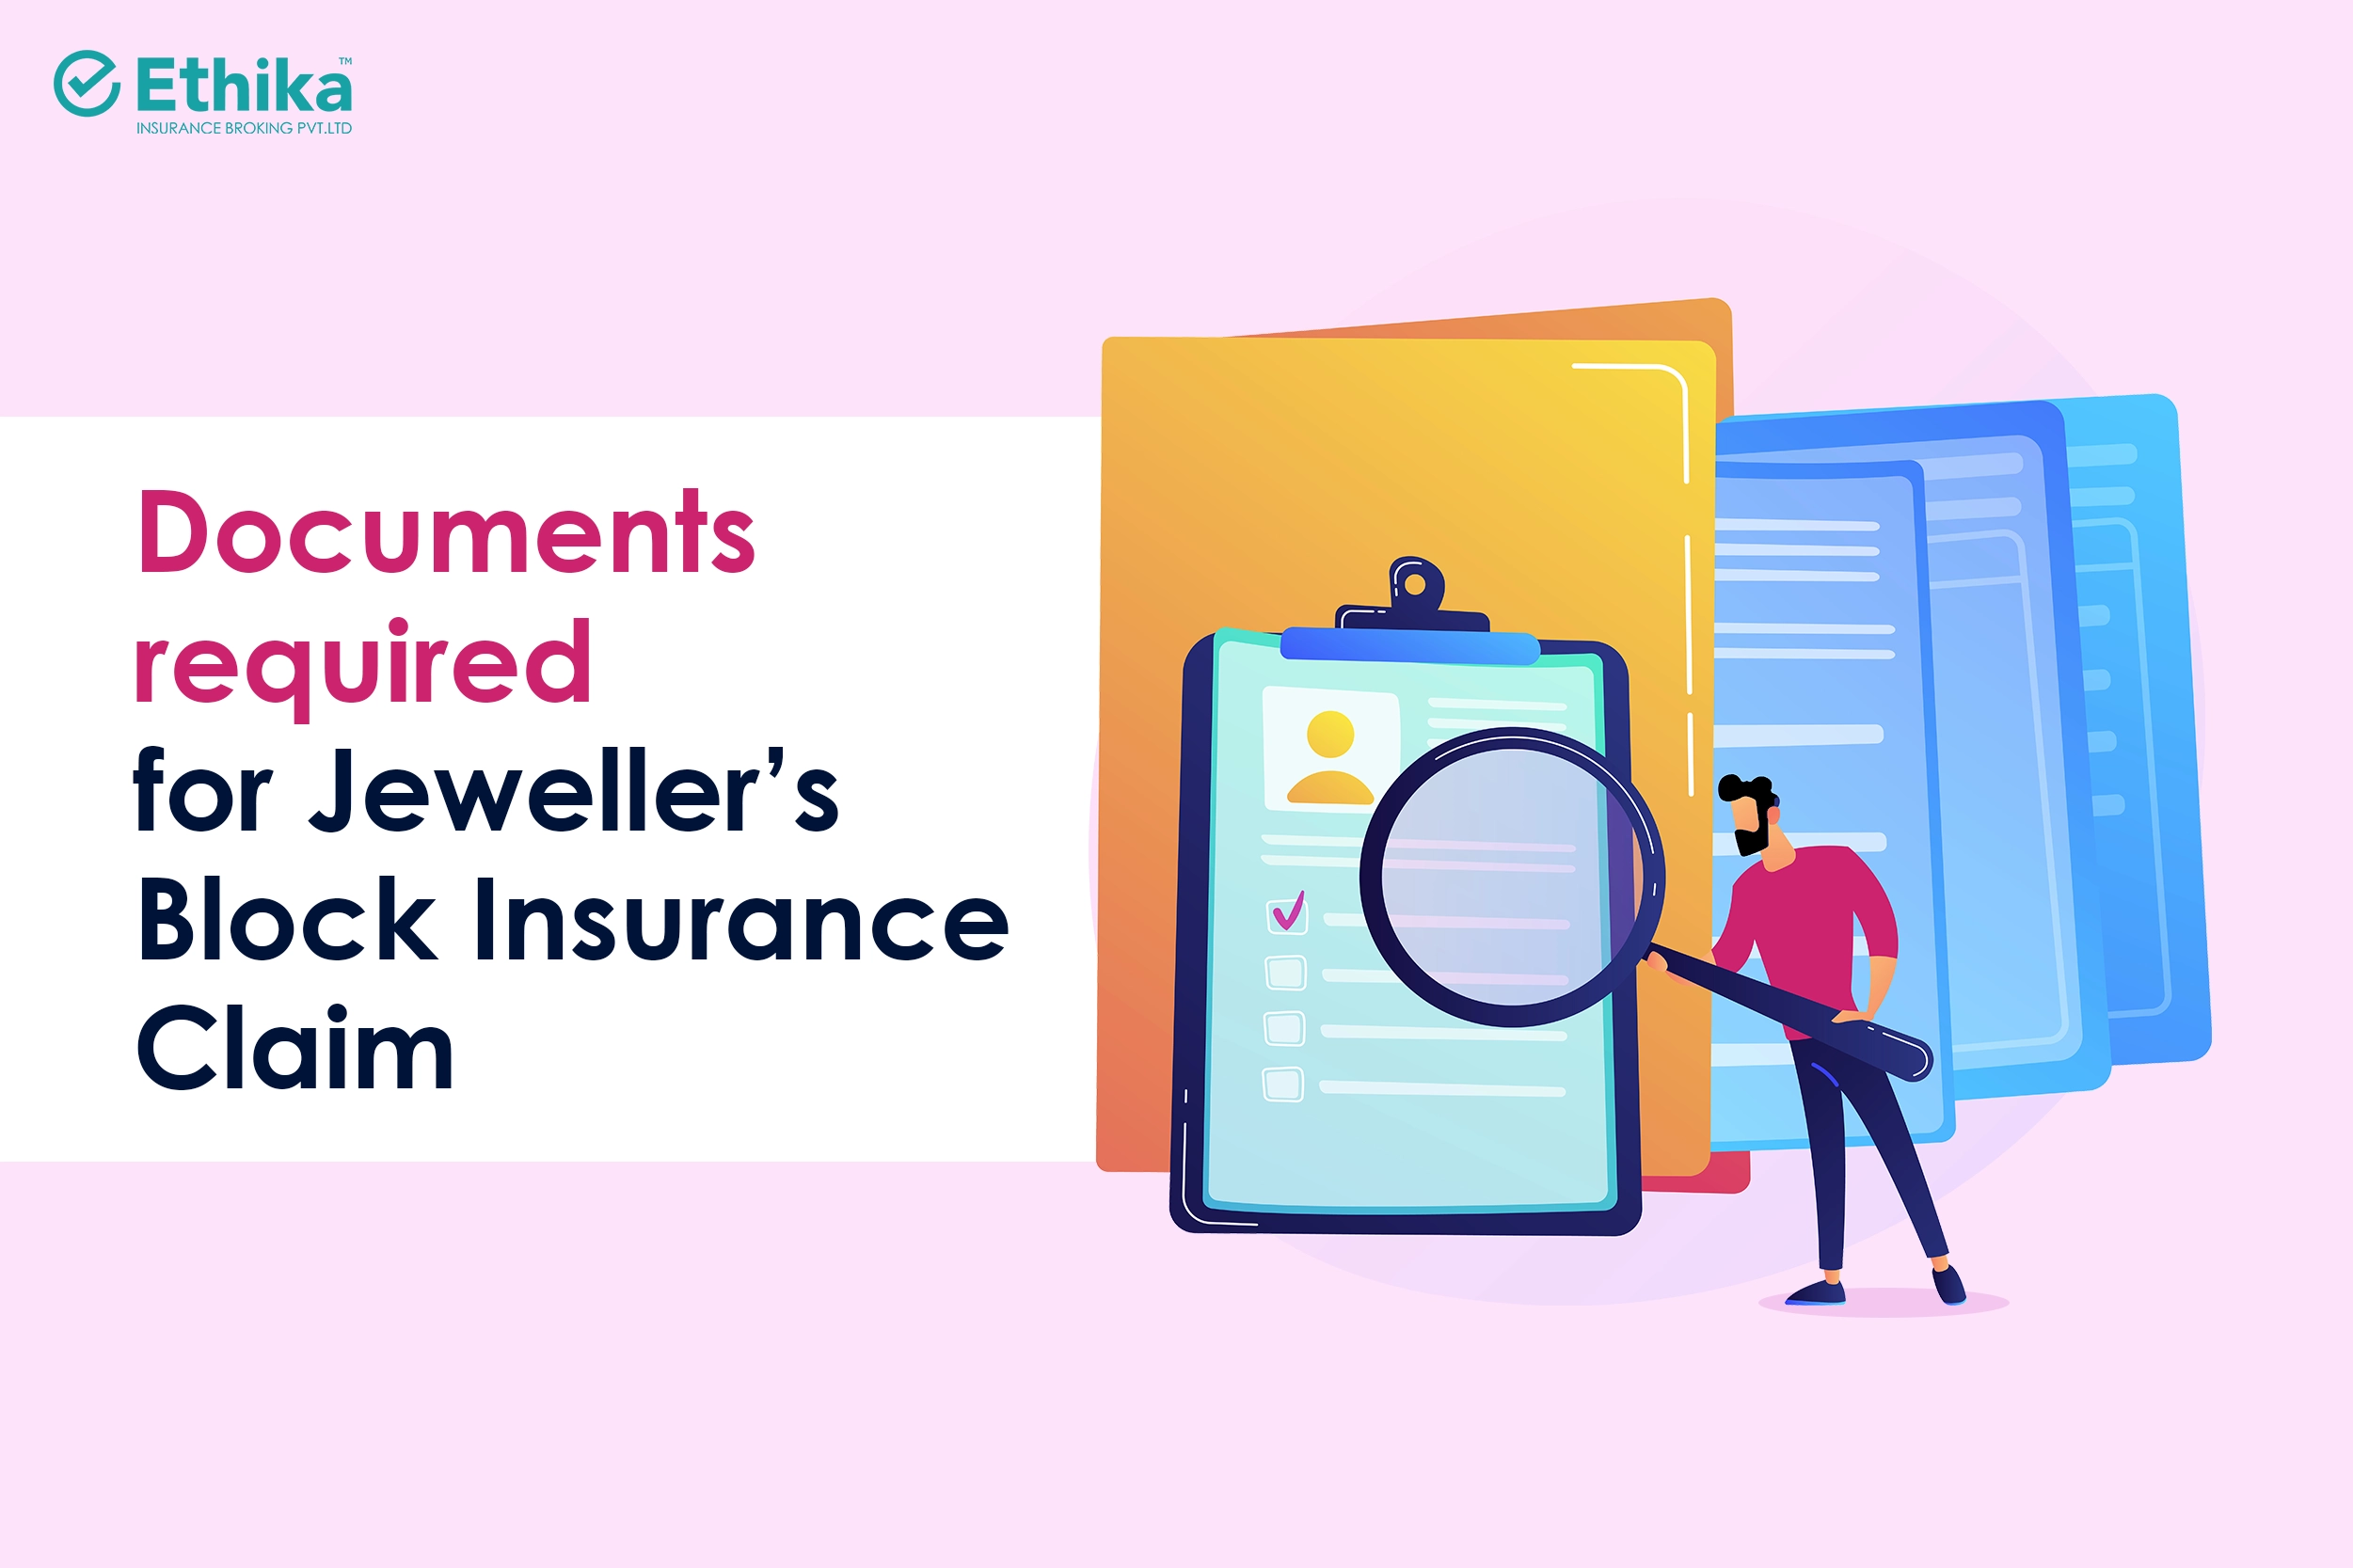 Documents required for Jeweller’s Block Insurance Claim